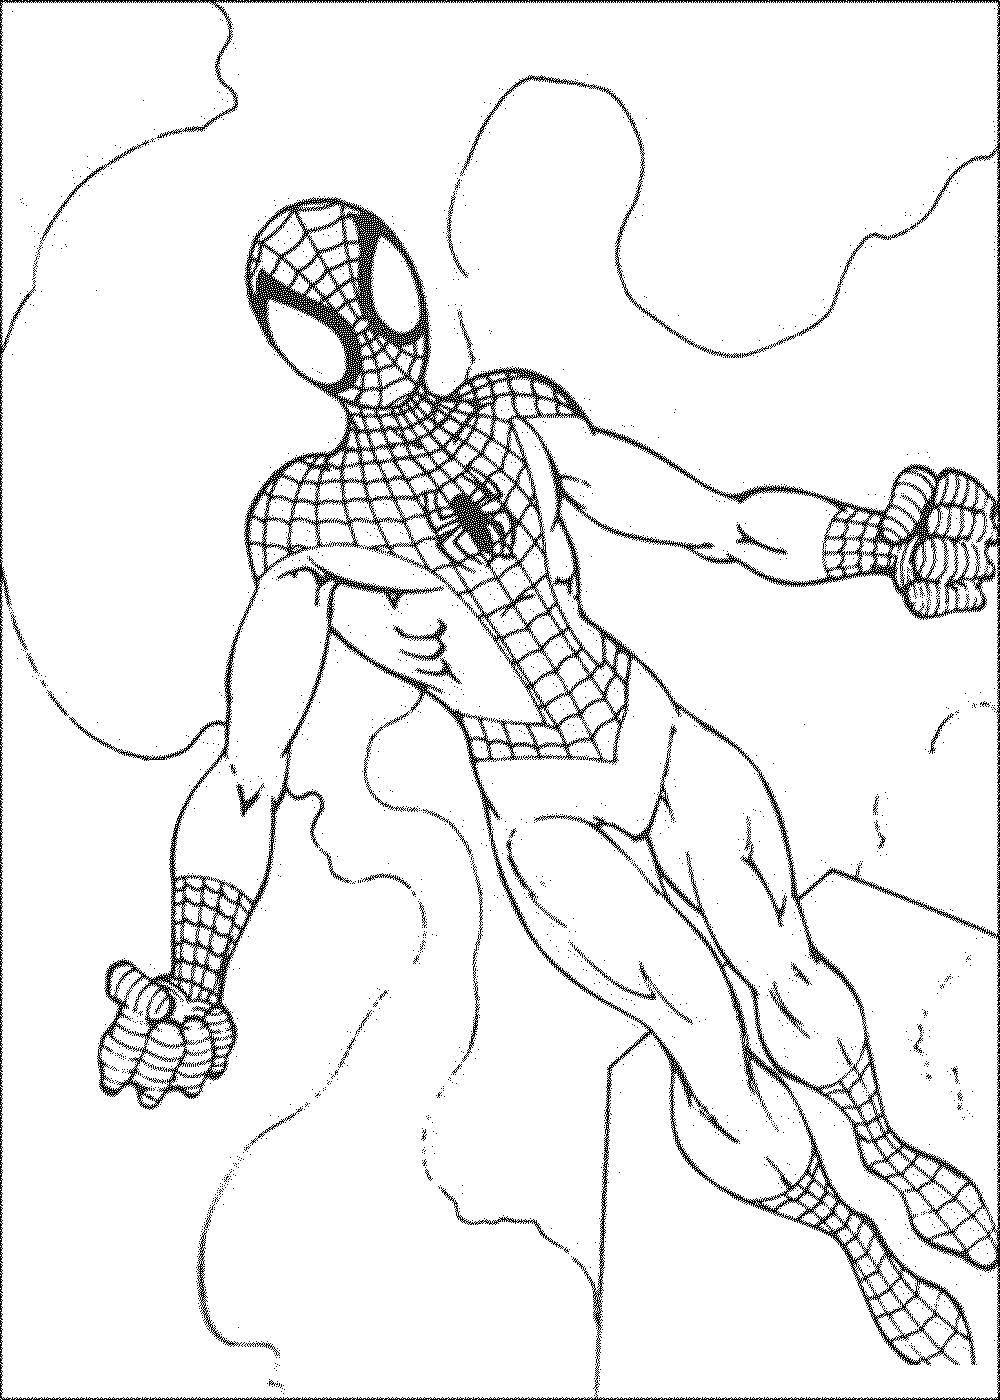 Coloring Spider-man. Category superheroes. Tags:  Spider, superheroes.